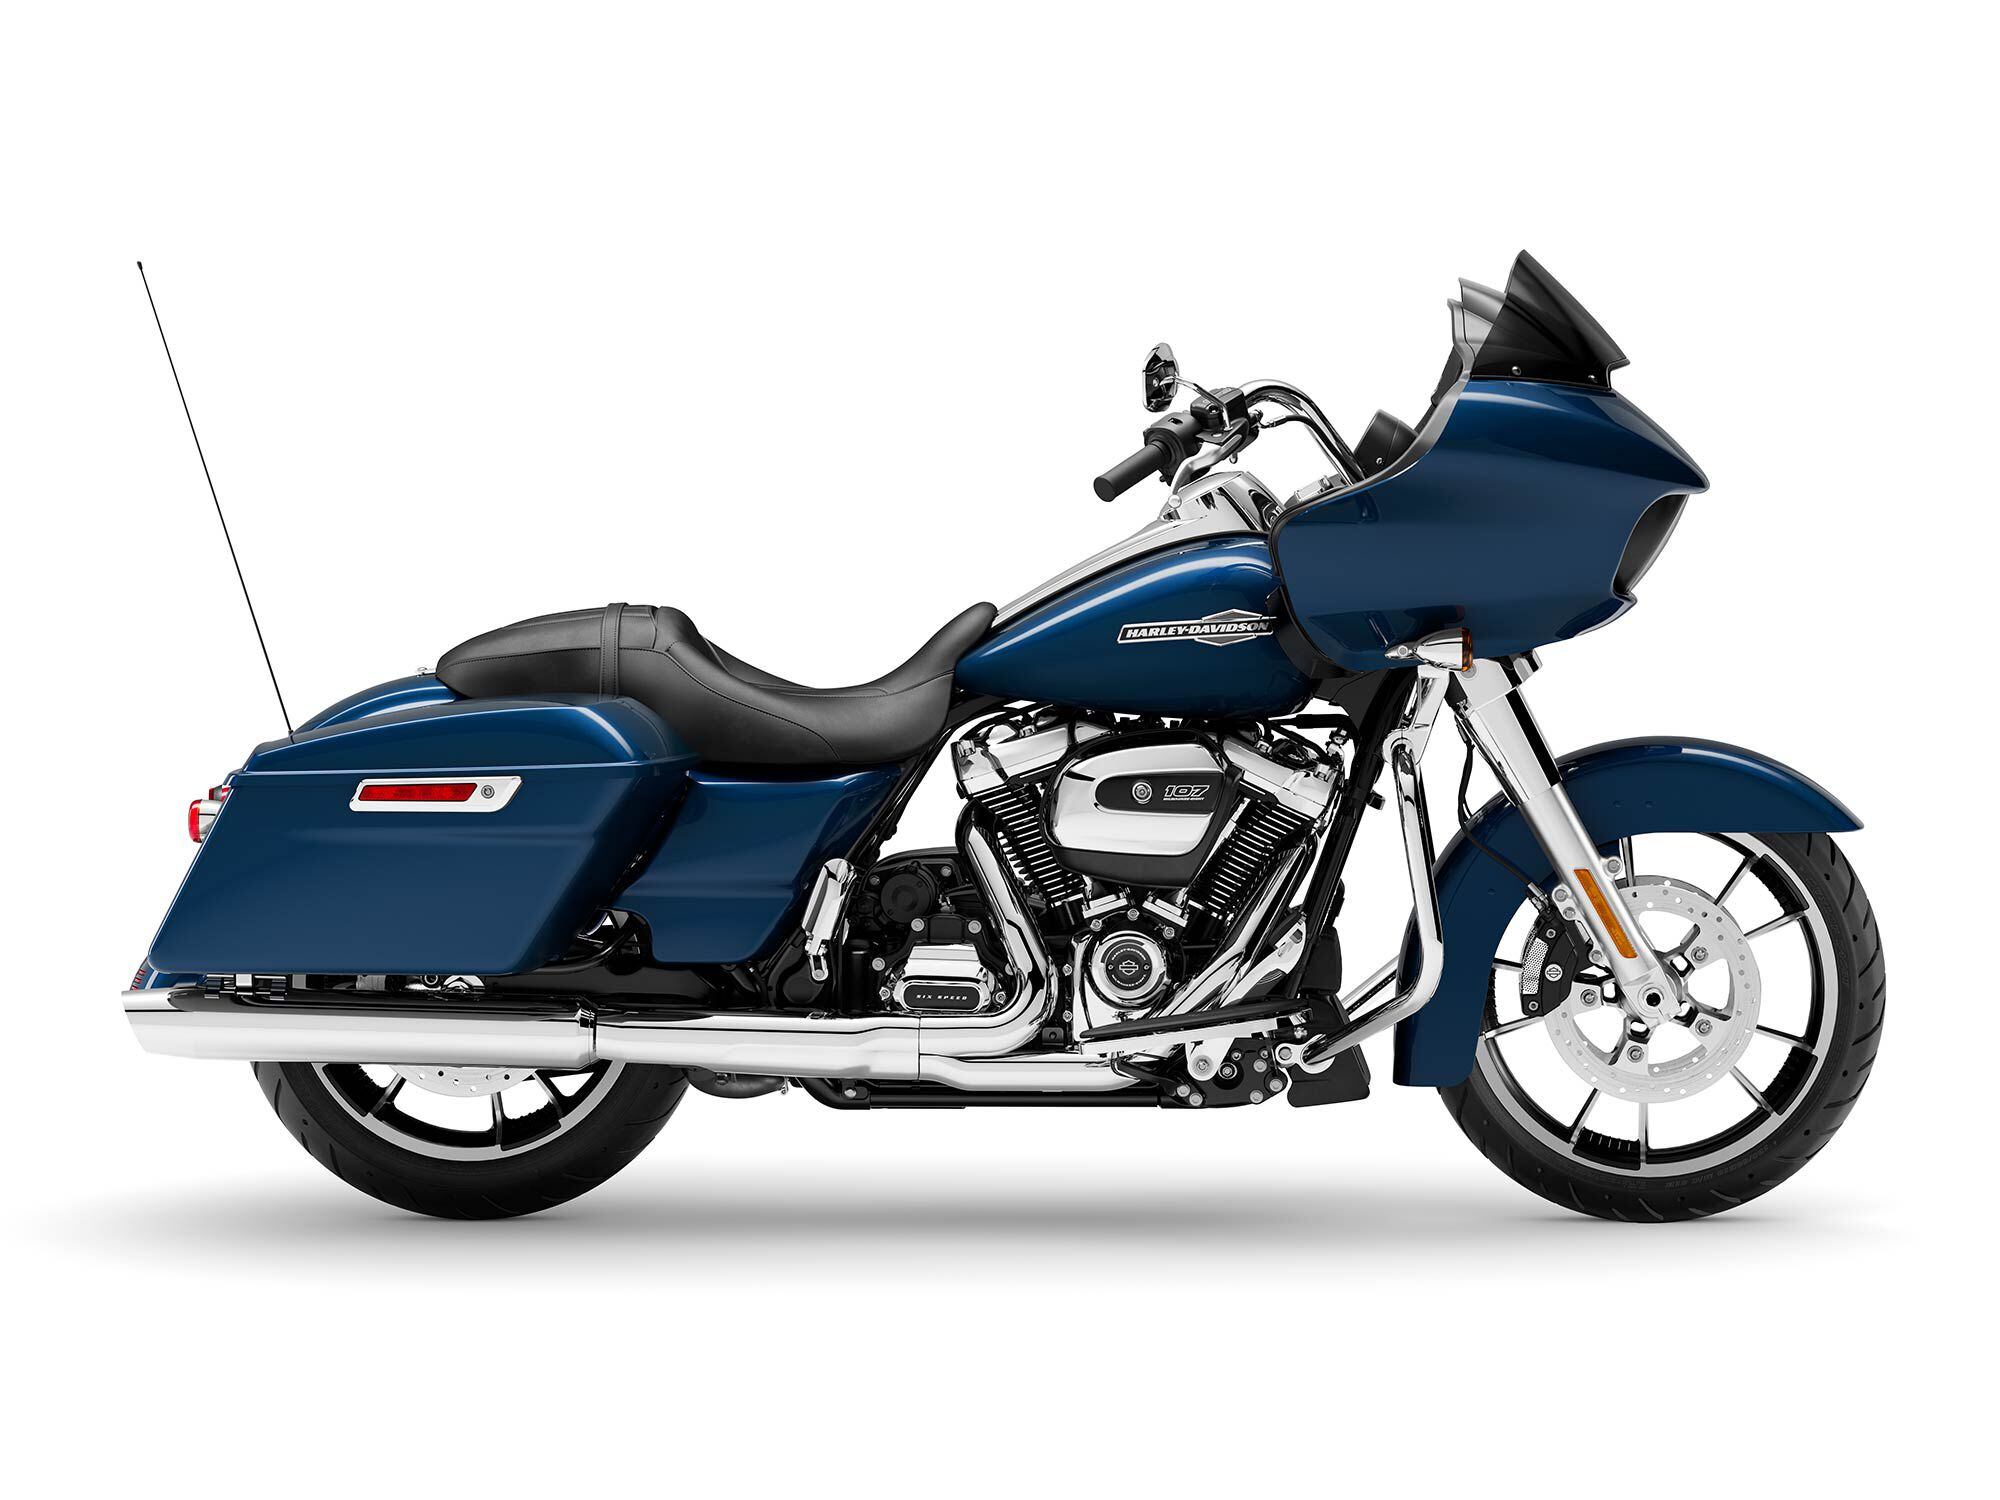 A shark-nose fairing gives the Road Glide an unmistakable profile.